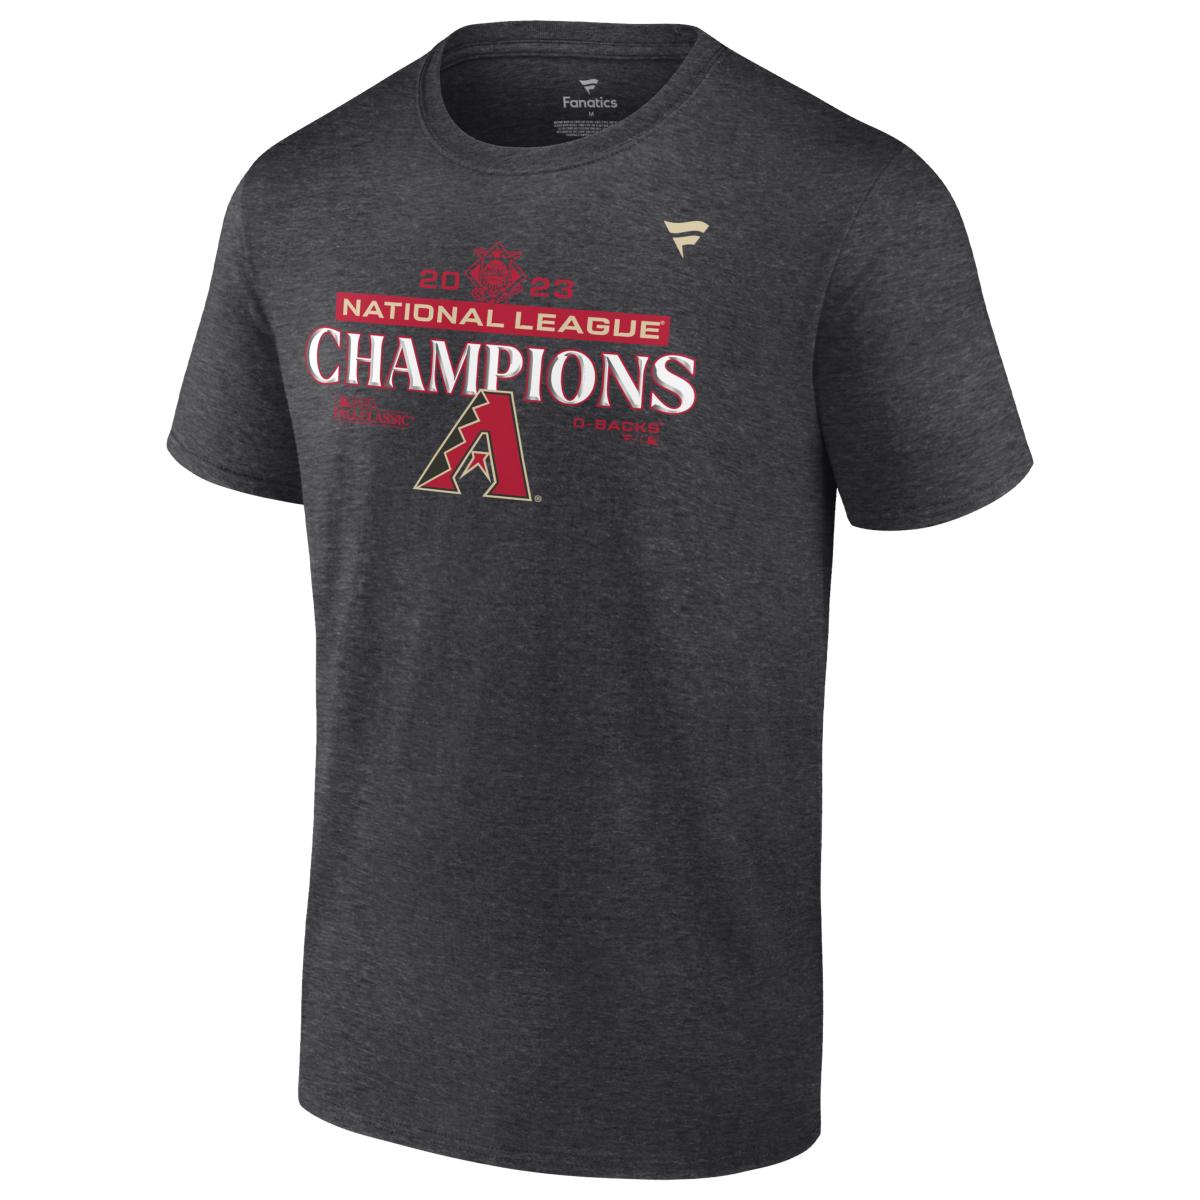 CHAMPIONSHIP MERCHANDISE AVAILABLE NOW!